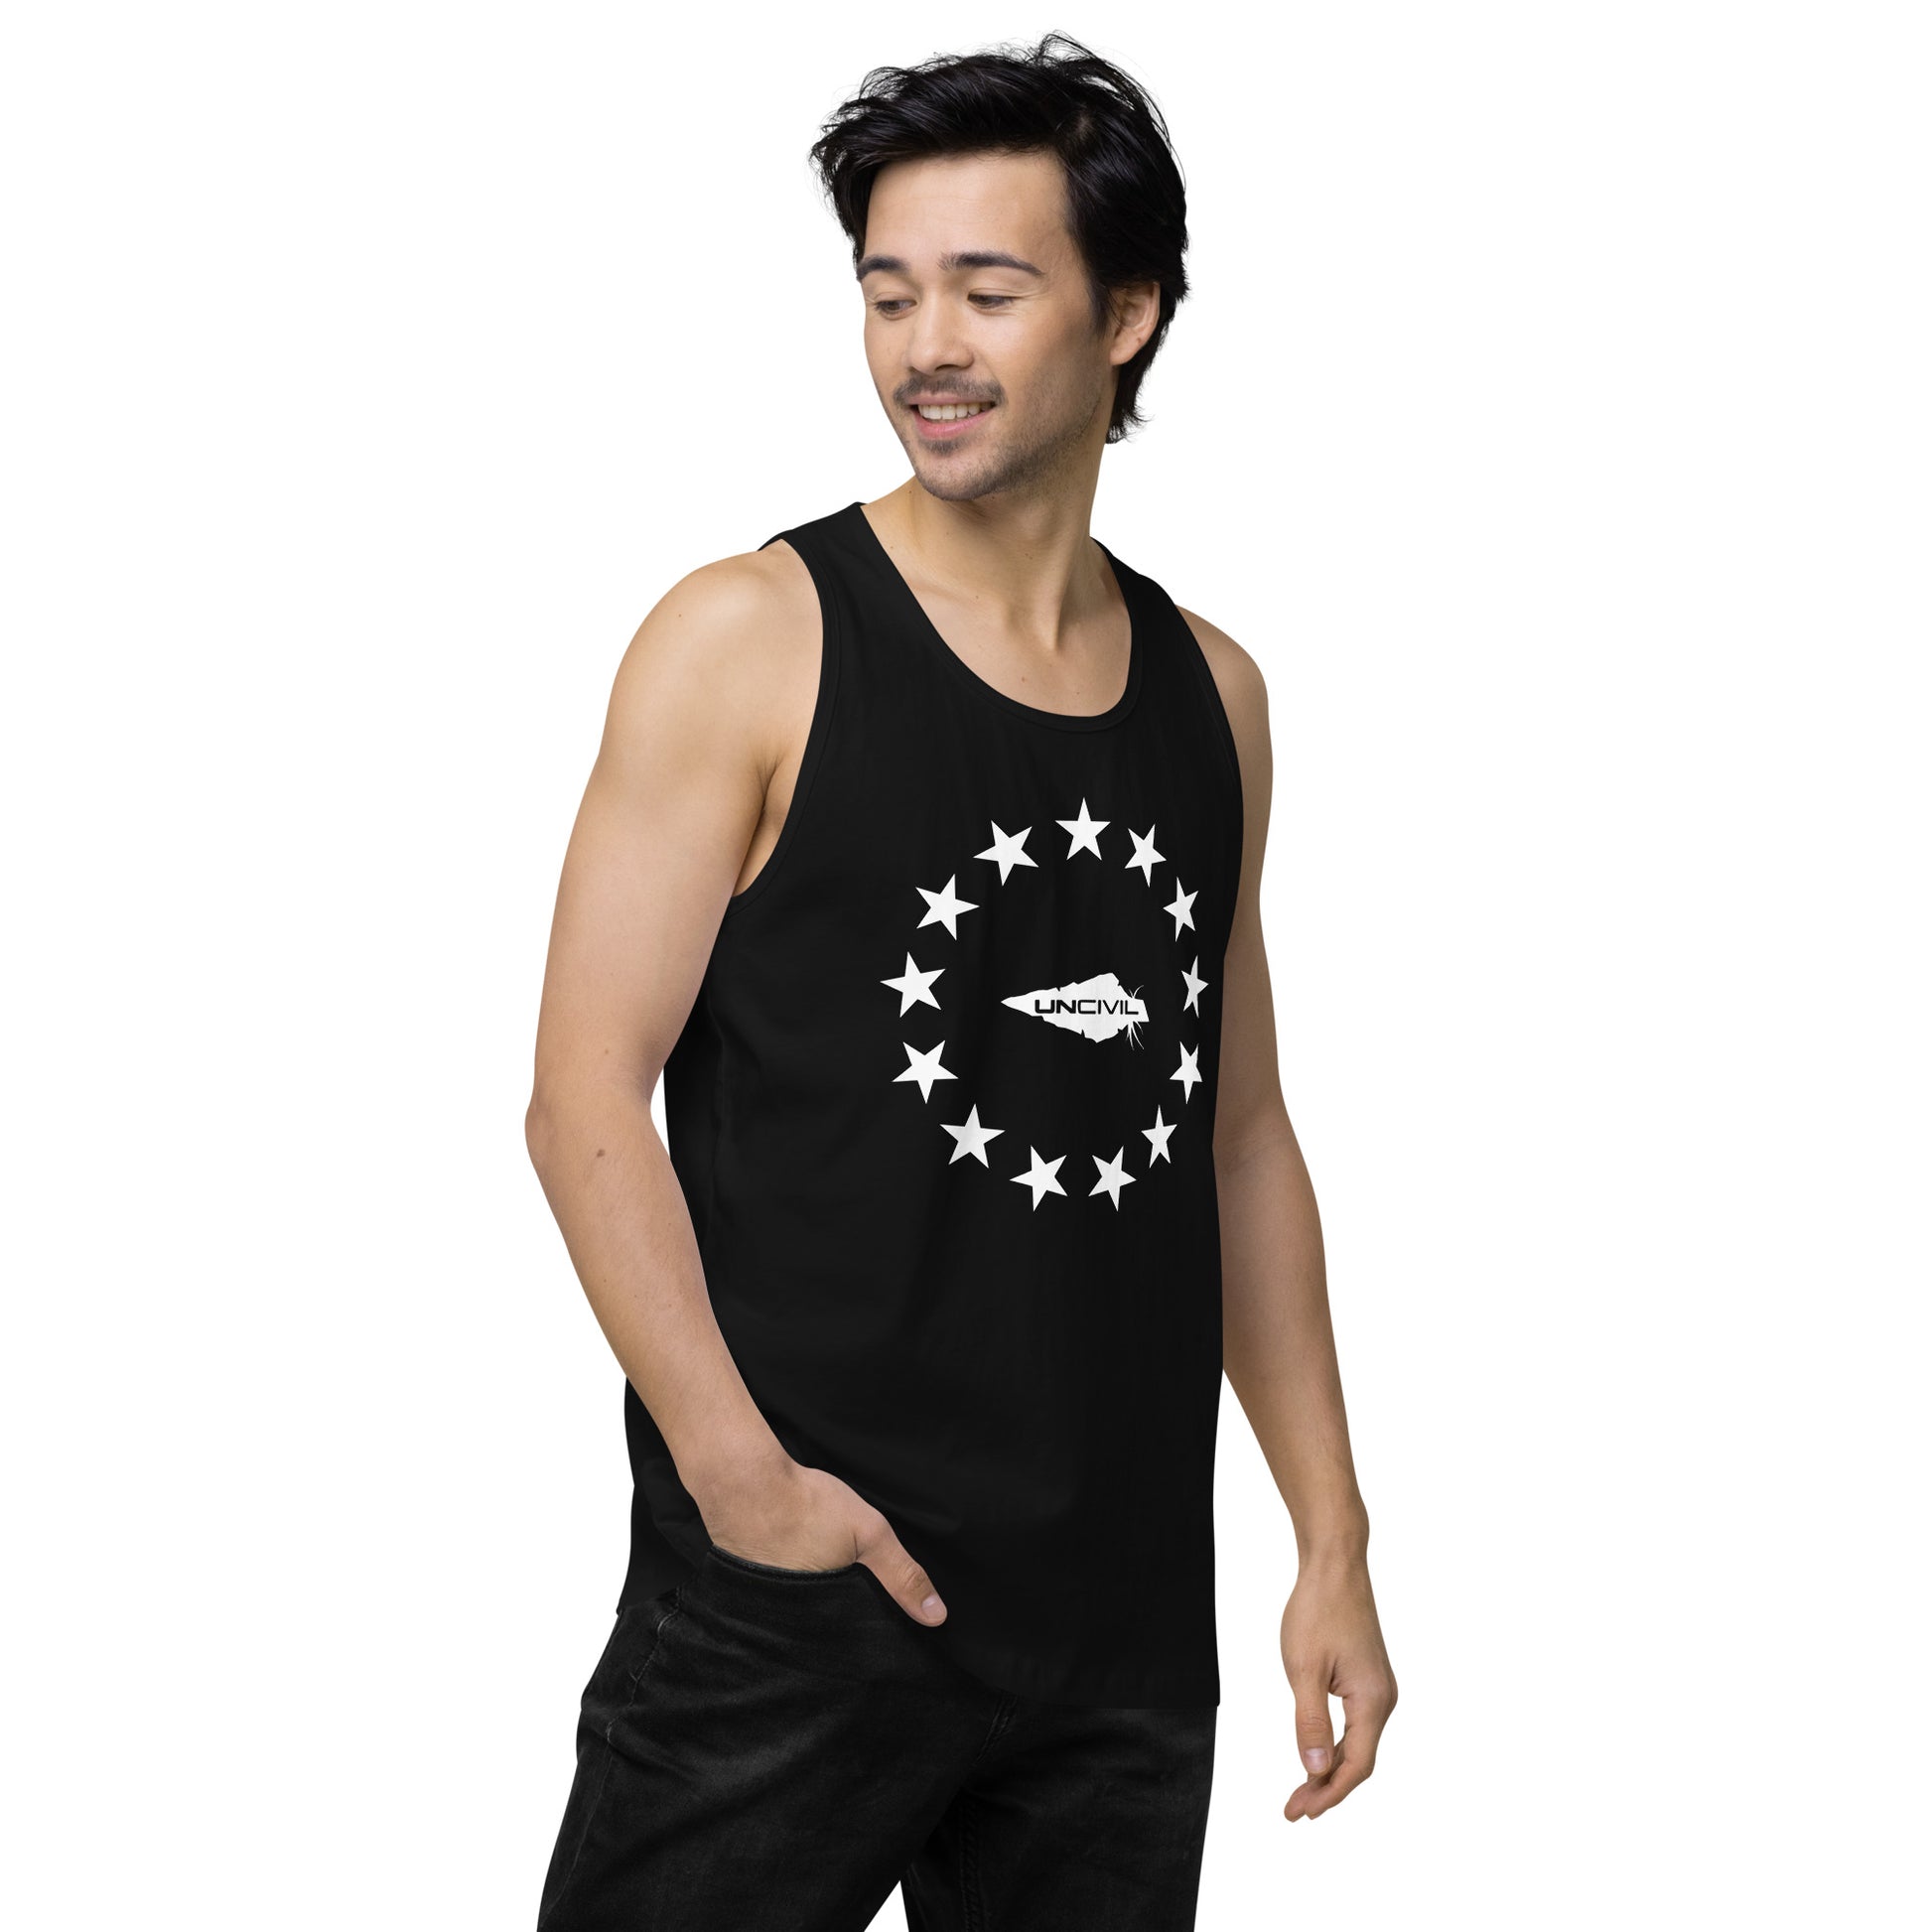 Betsy Ross men's tank top. Featuring the iconic 13 stars design, this tank is perfect for anyone who loves America and its rich history. Black and white.